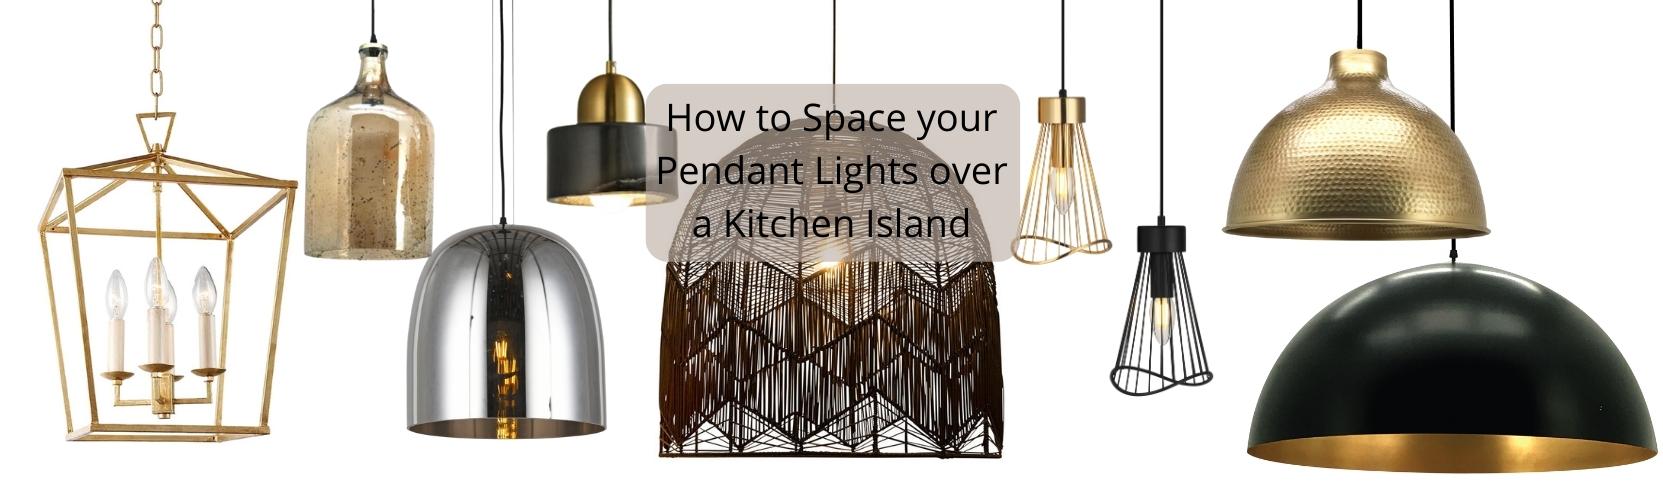 Pendant Light Height and Spacing Over Your Kitchen Island